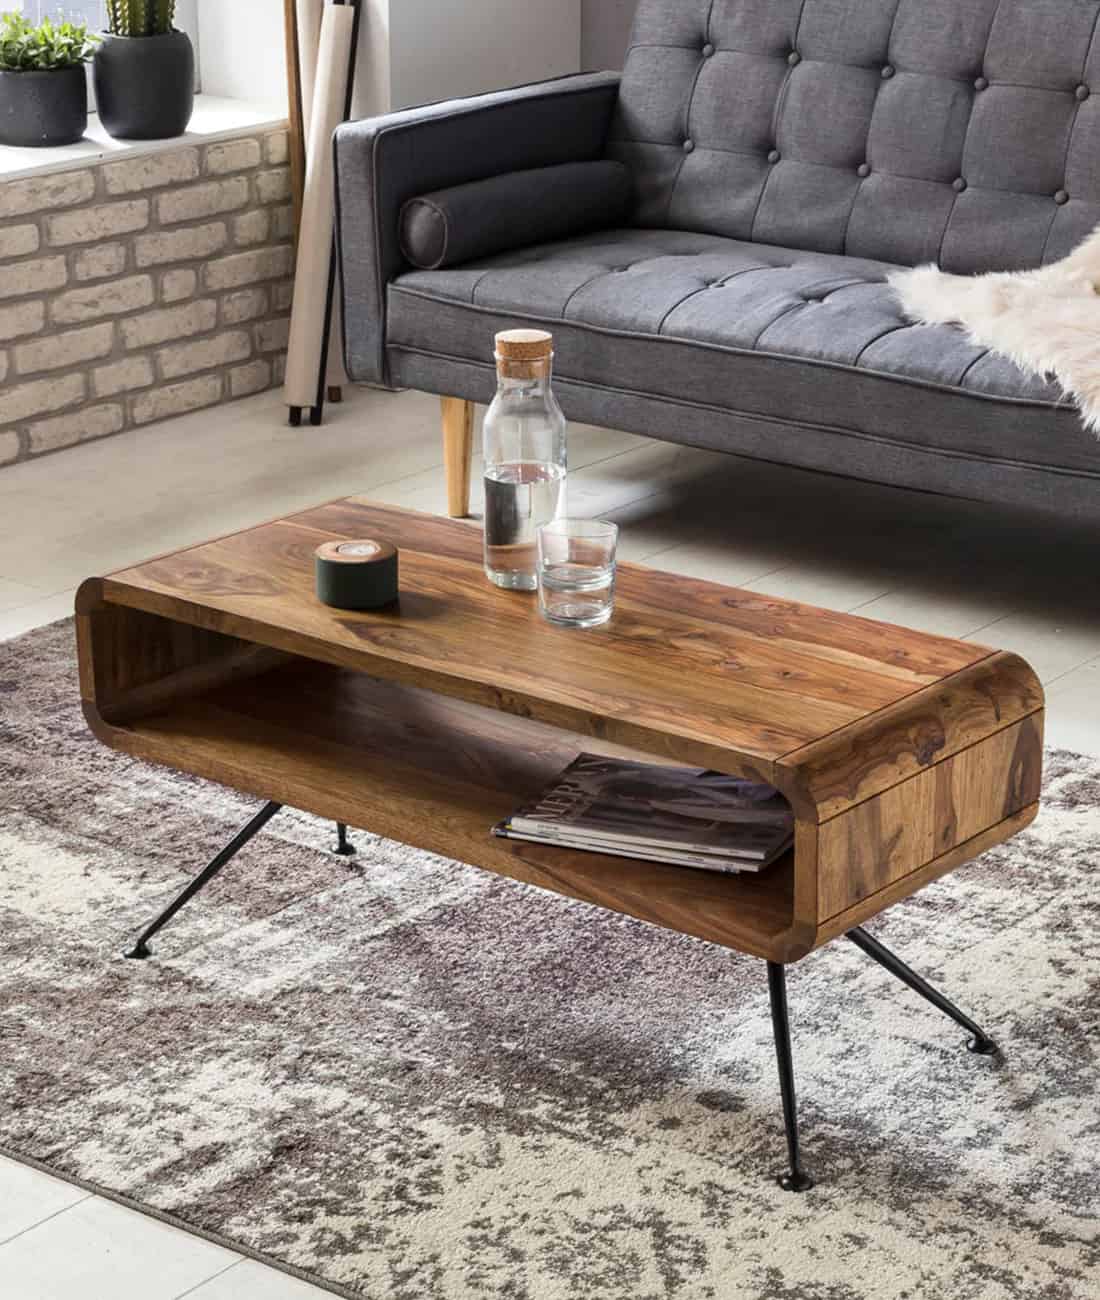 Wooden centre table with a bottle